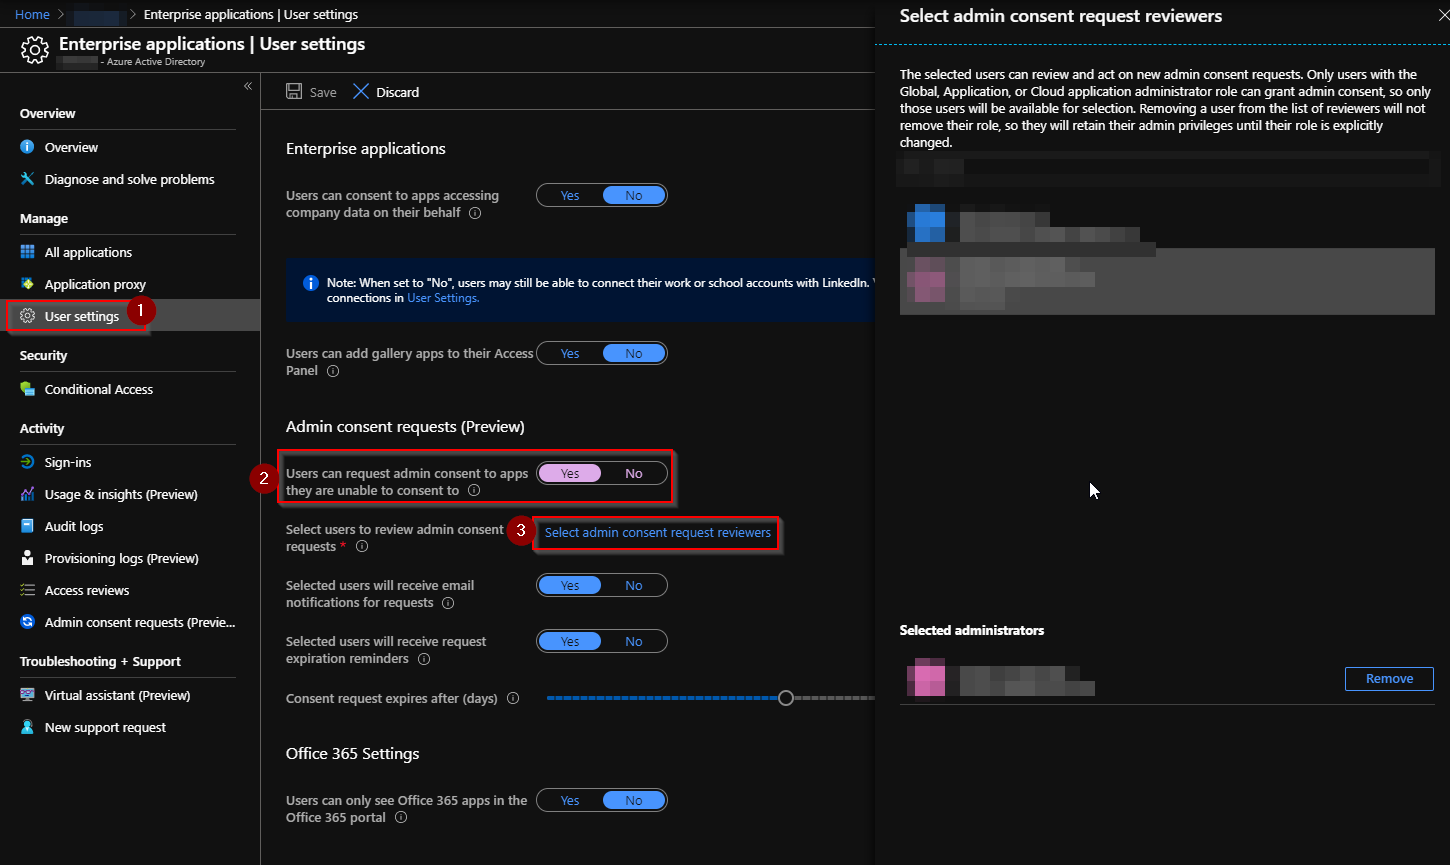 Enable Enterprise Application Admin Consent Request in Azure AD